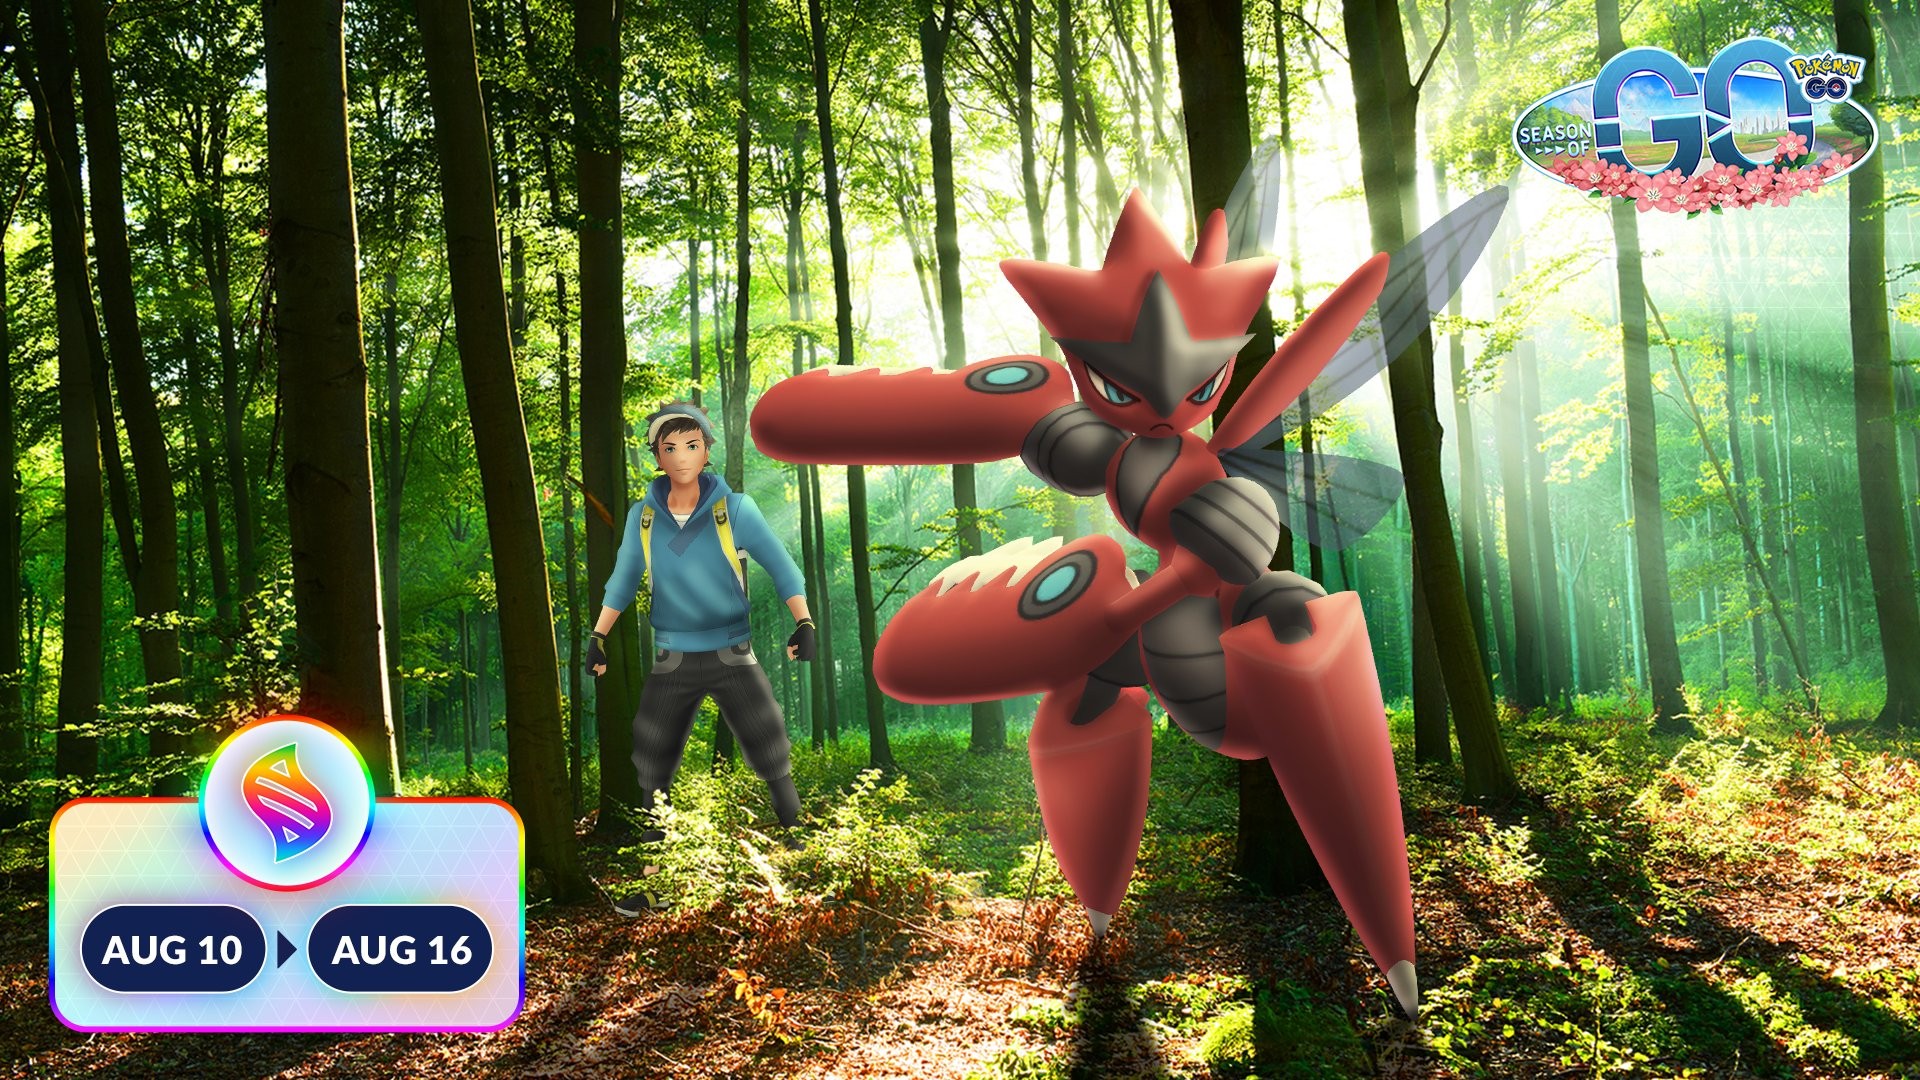 Pokemon Go: The Best Movesets and Counters for Genesect